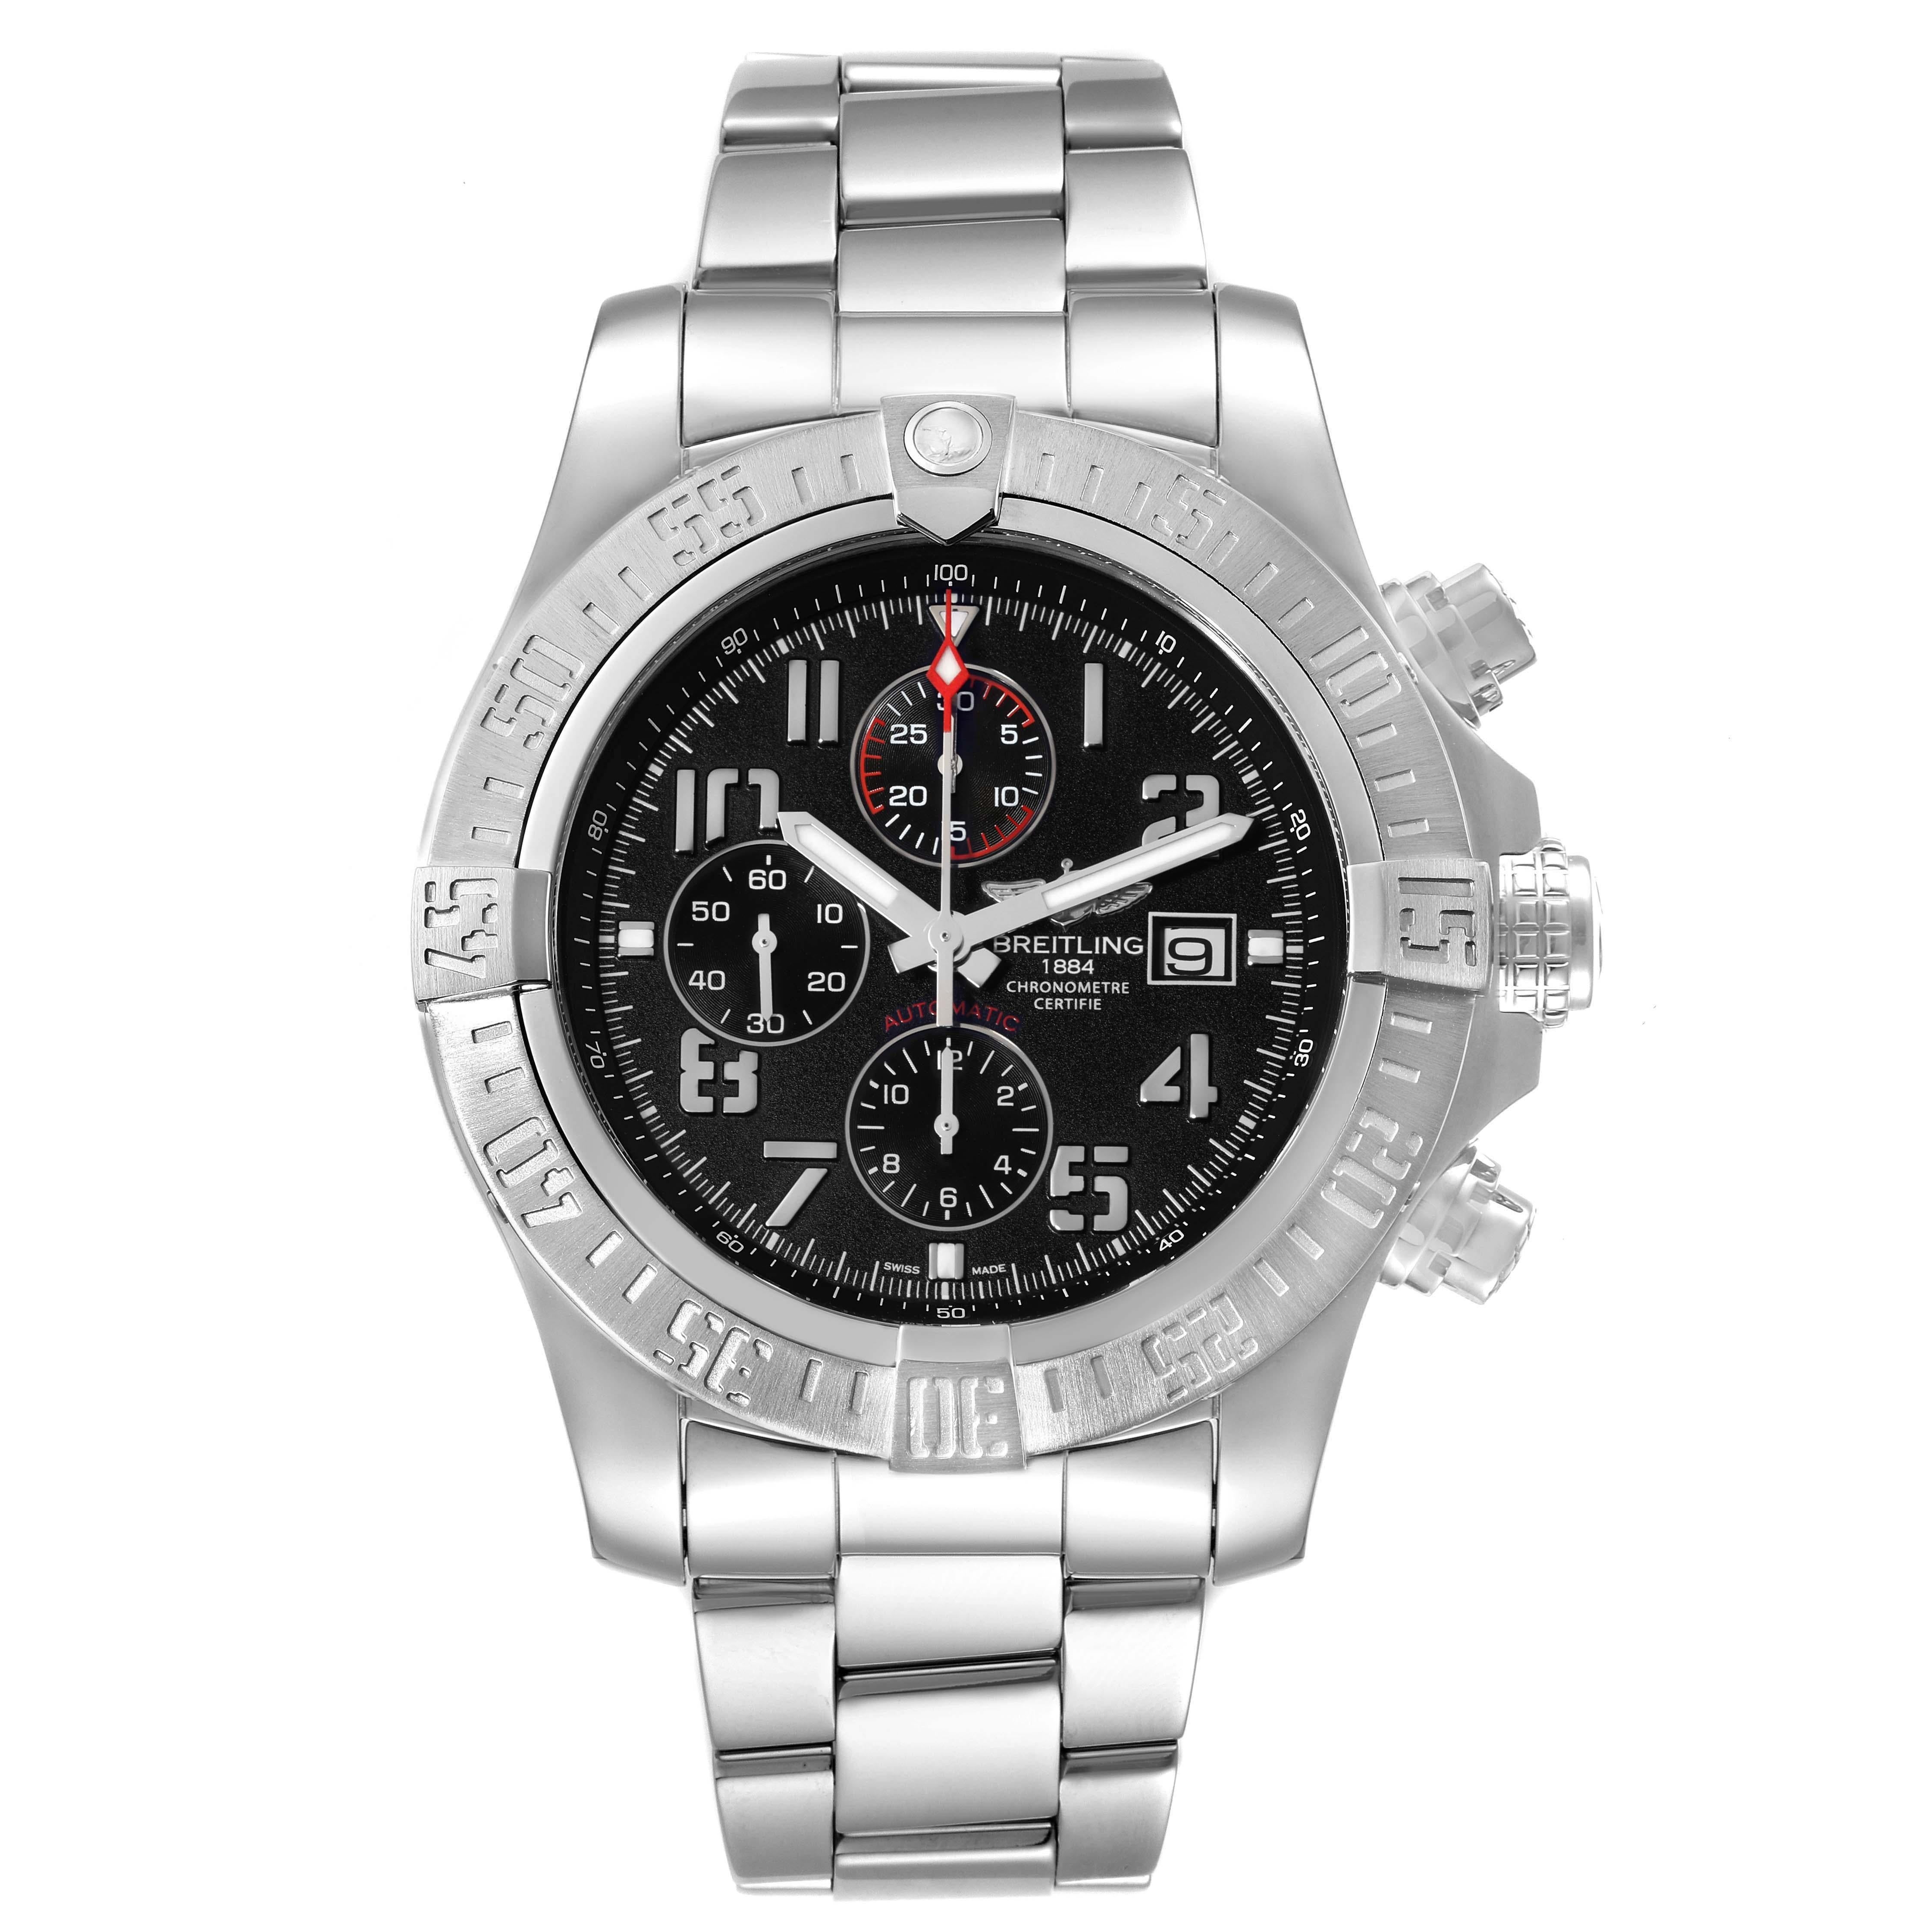 Breitling Aeromarine Super Avenger Steel Mens Watch A13371 Box Papers. Automatic self-winding movement. Chronograph function. Stainless steel case 48 mm in diameter. Case thickness 17.75 mm. Stainless steel unidirectional rotating bezel. 0-60